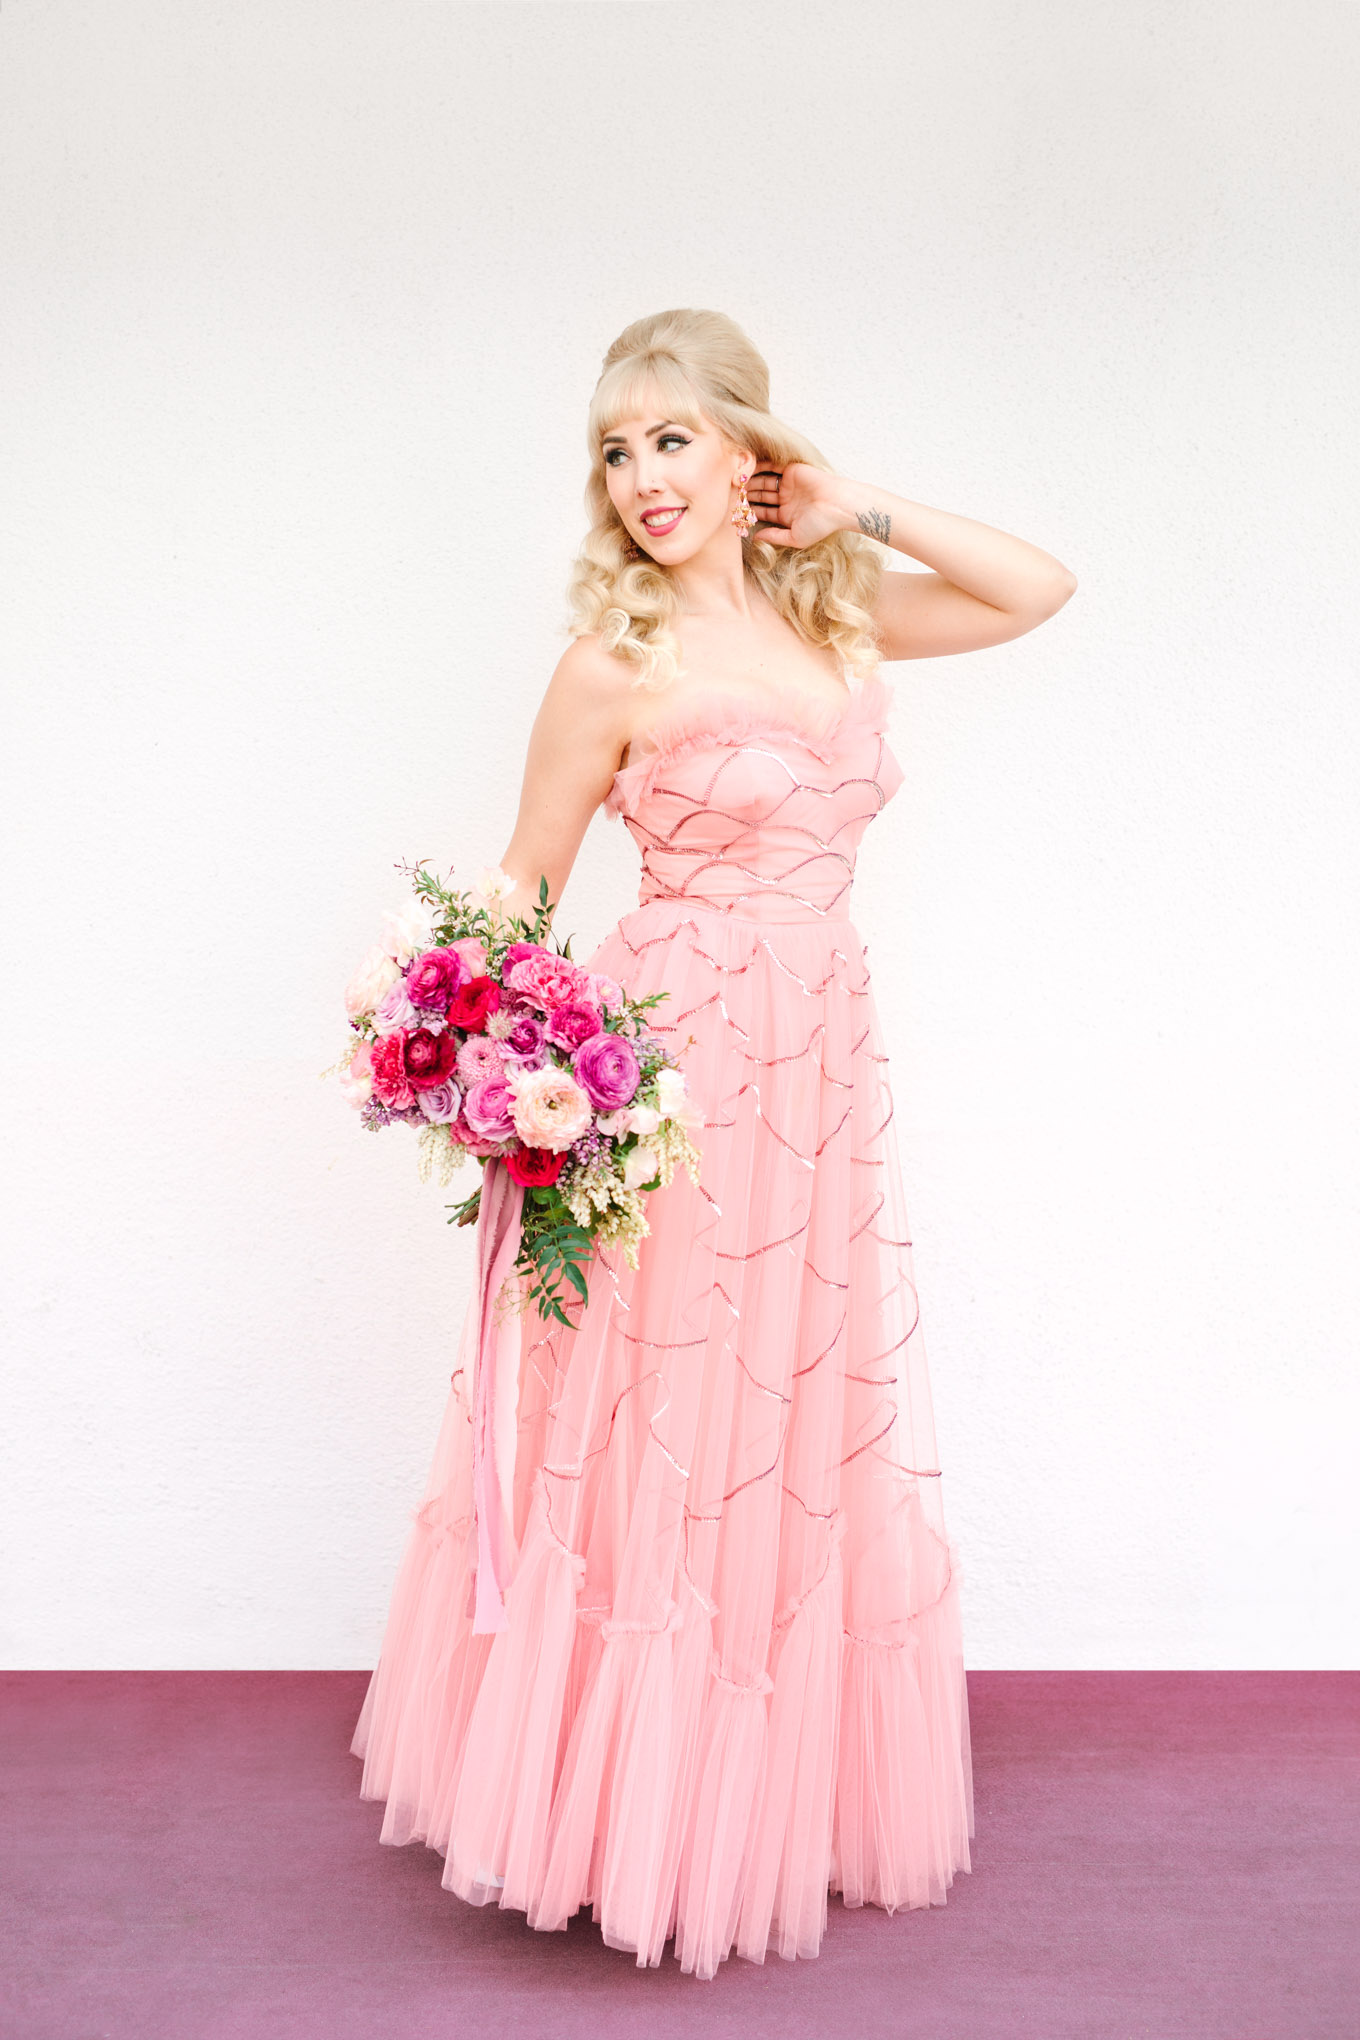 Retro bride in vintage pink prom dress. Modern vintage-inspired Palm Springs engagement session with a 1960s pink Cadillac, retro clothing, and flowers by Shindig Chic. | Colorful and elevated wedding inspiration for fun-loving couples in Southern California | #engagementsession #PalmSpringsengagement #vintageweddingdress #floralcar #pinkcar   Source: Mary Costa Photography | Los Angeles